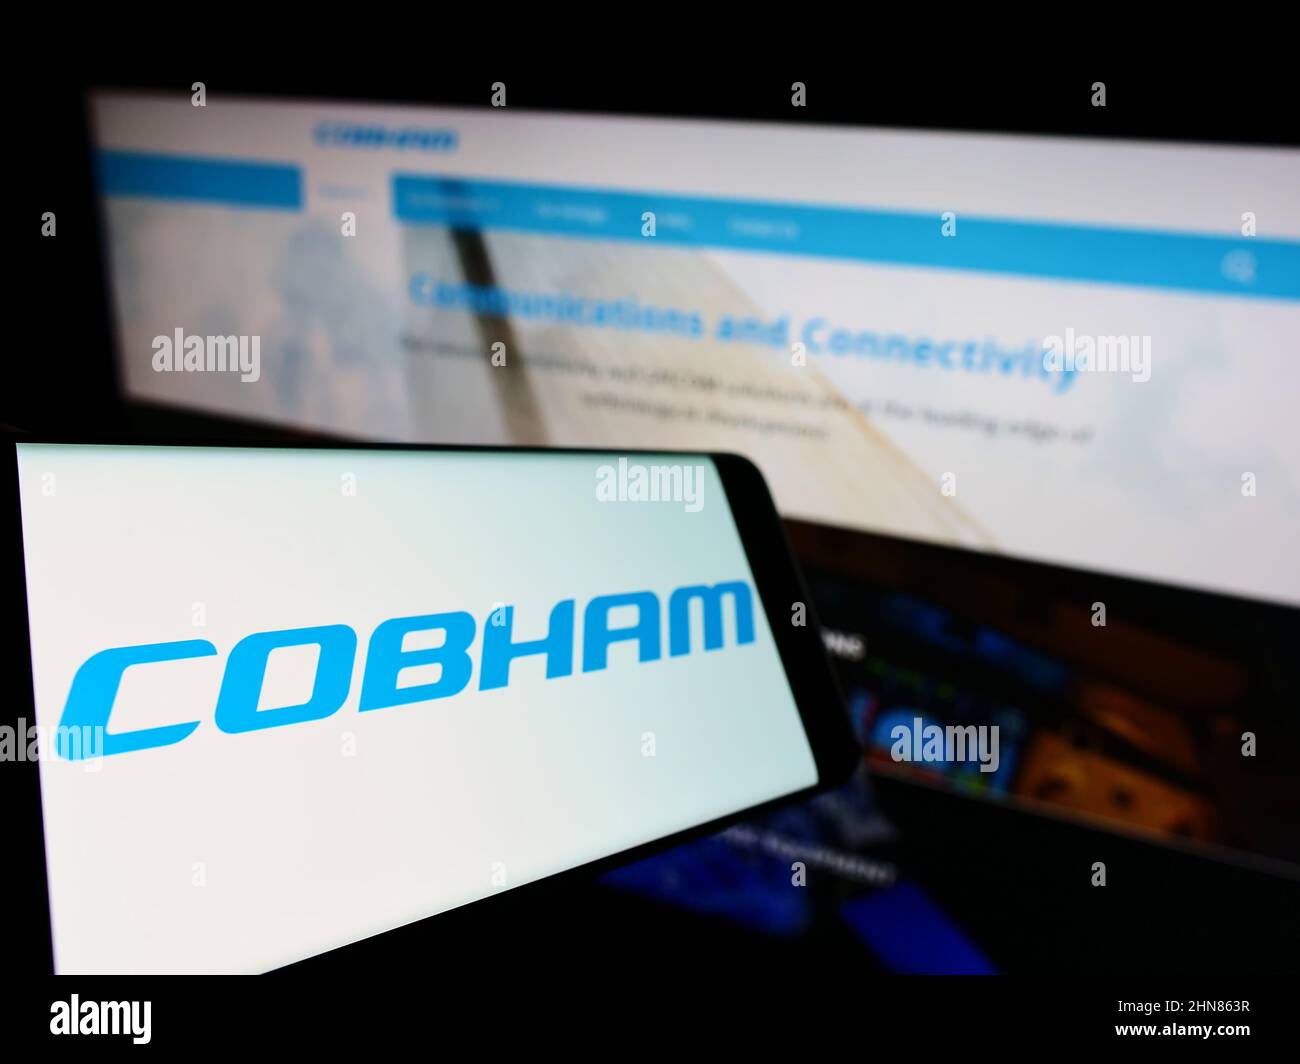 Smartphone with logo of British aerospace company Cobham Limited on screen in front of business website. Focus on left of phone display. Stock Photo